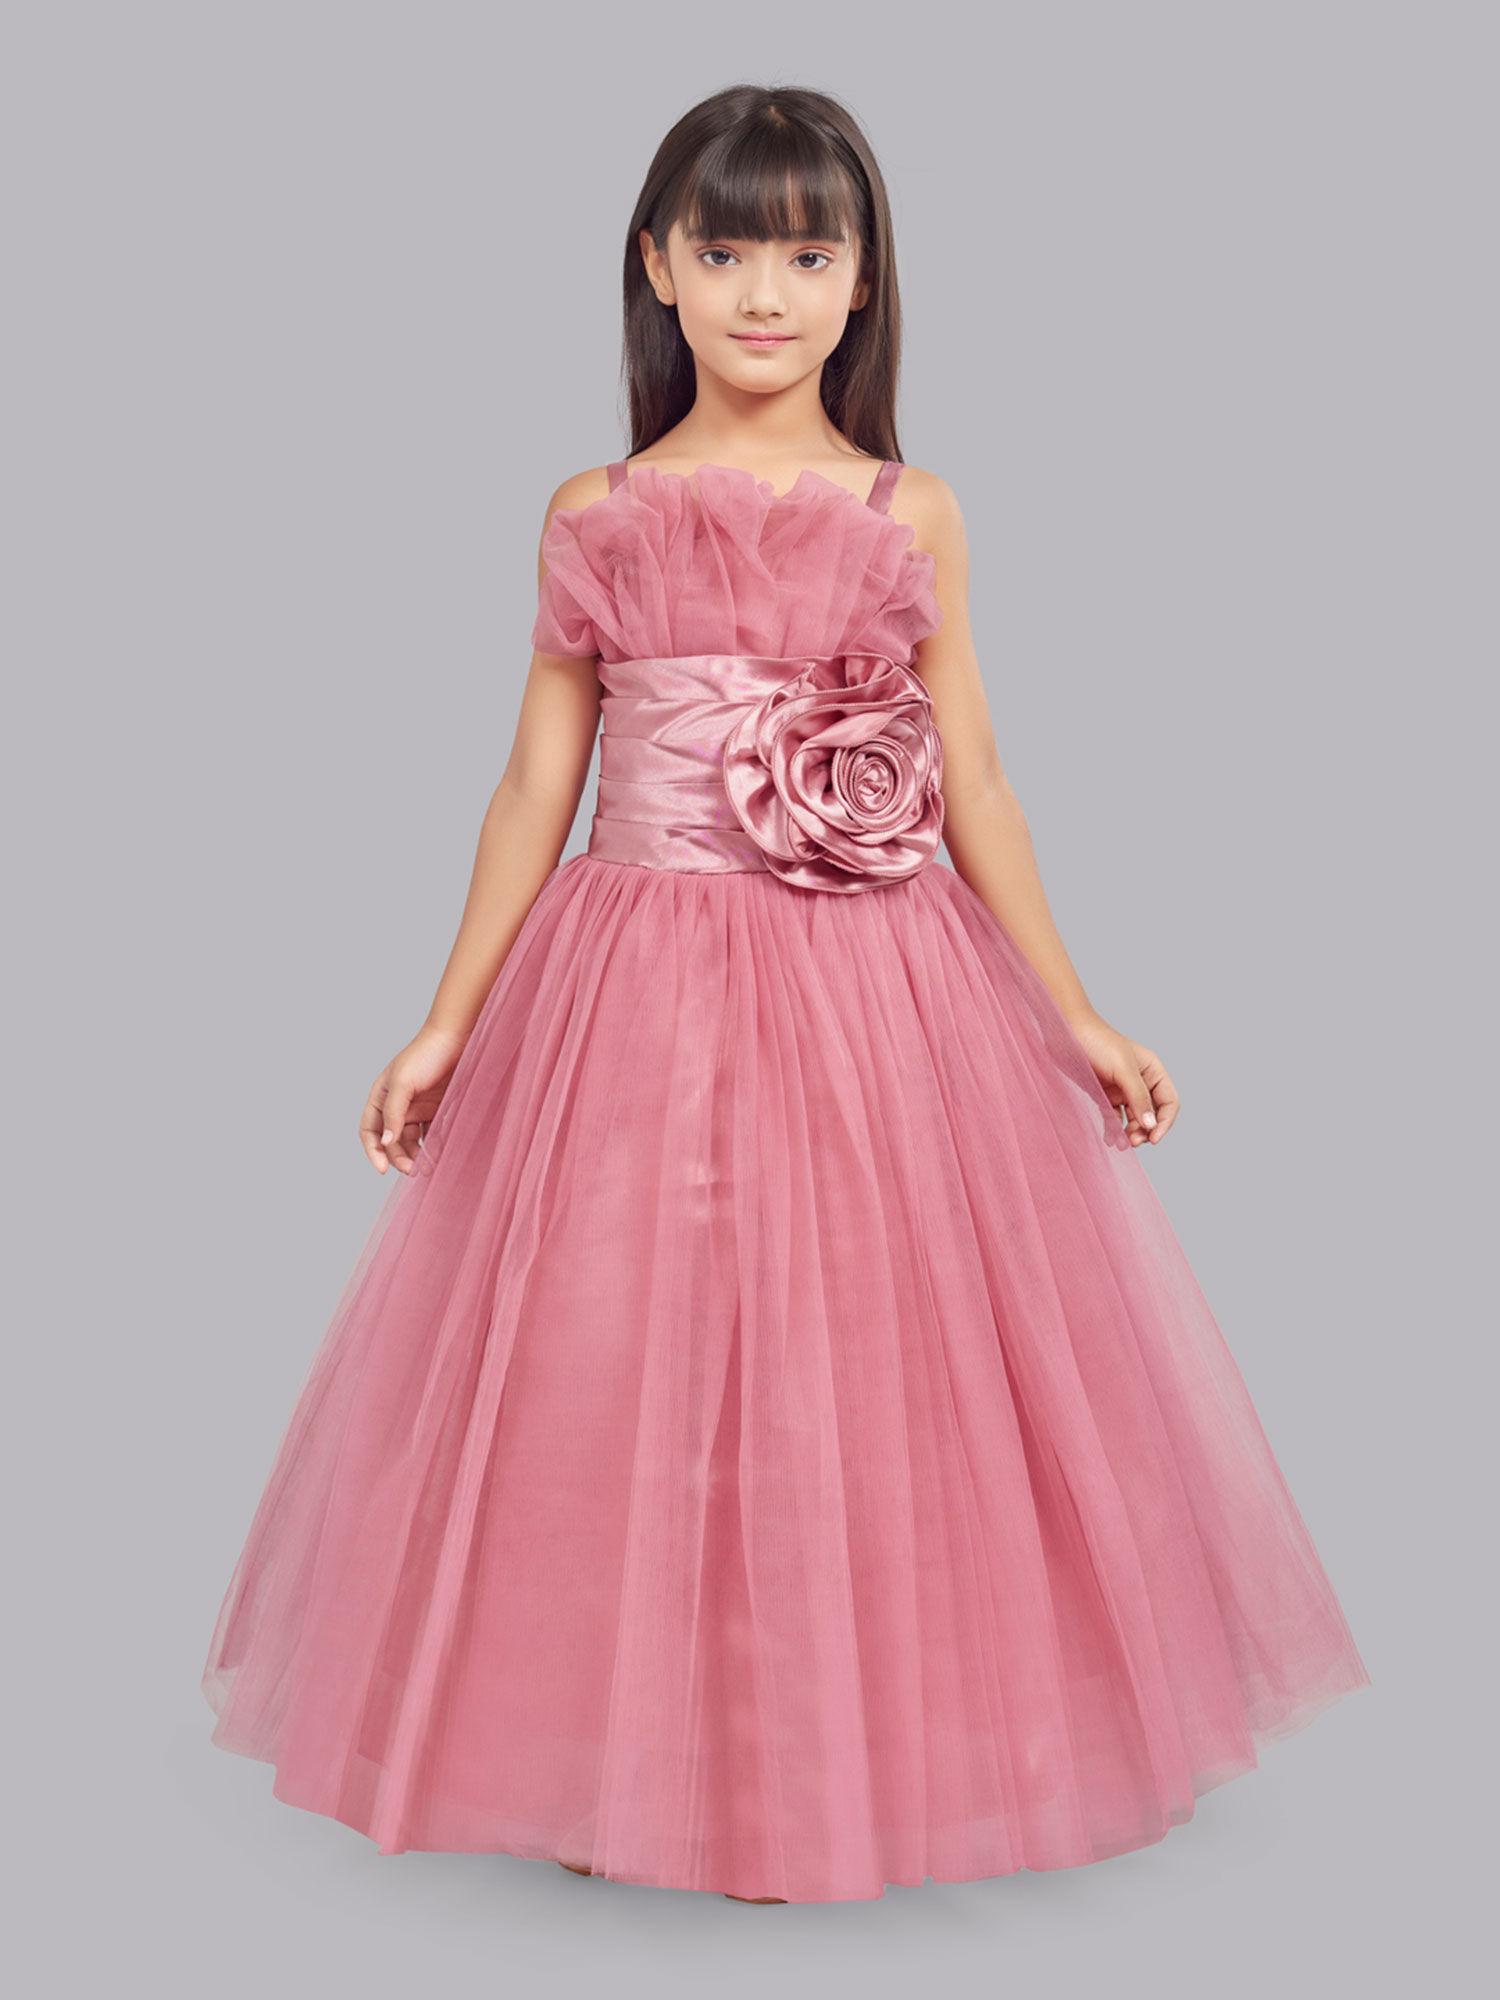 ruffled silhouette party gown - rose gold